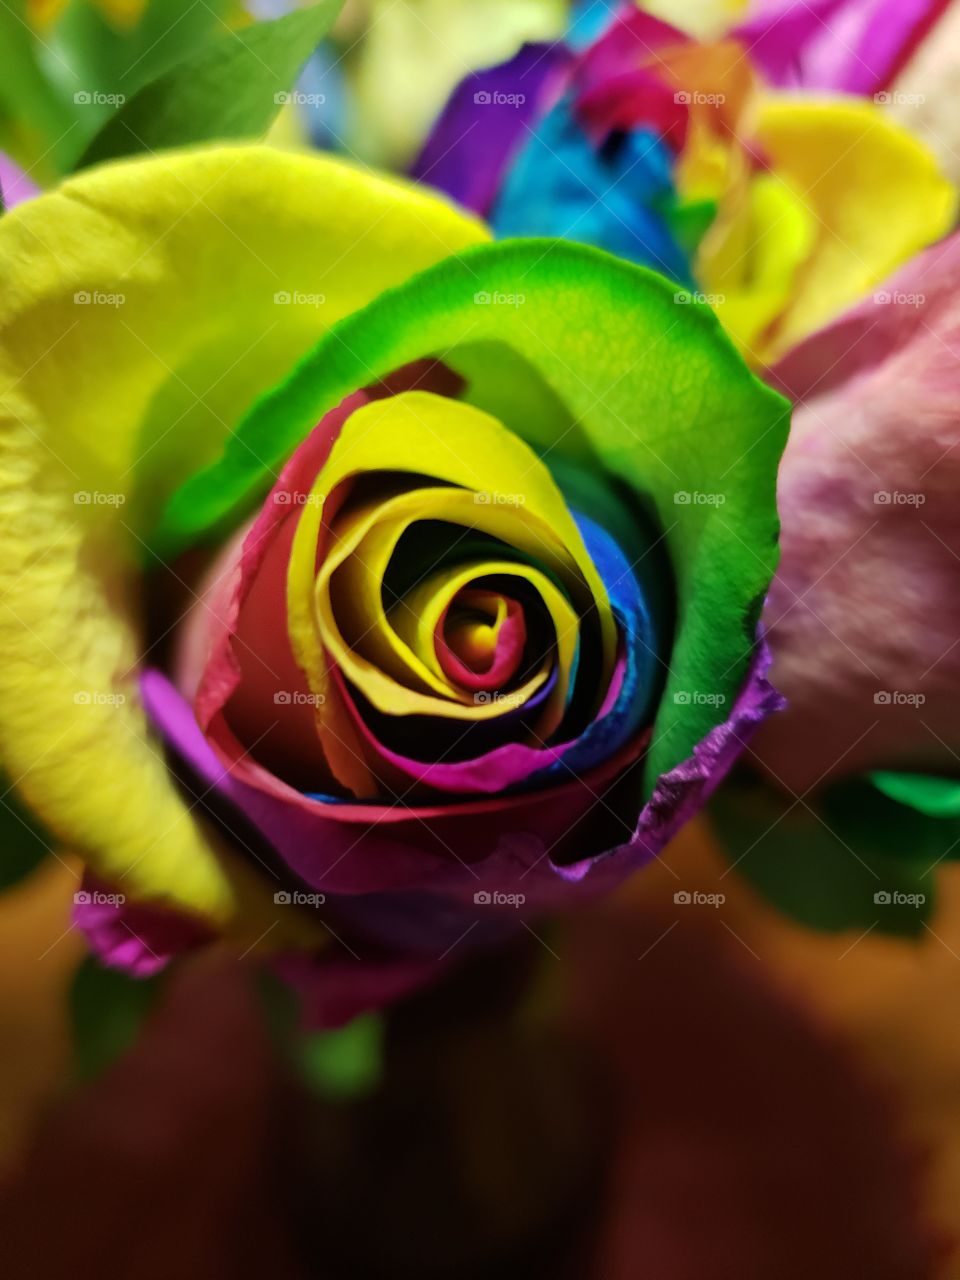 Suprise colorful vibrant multicolored roses smells yummy